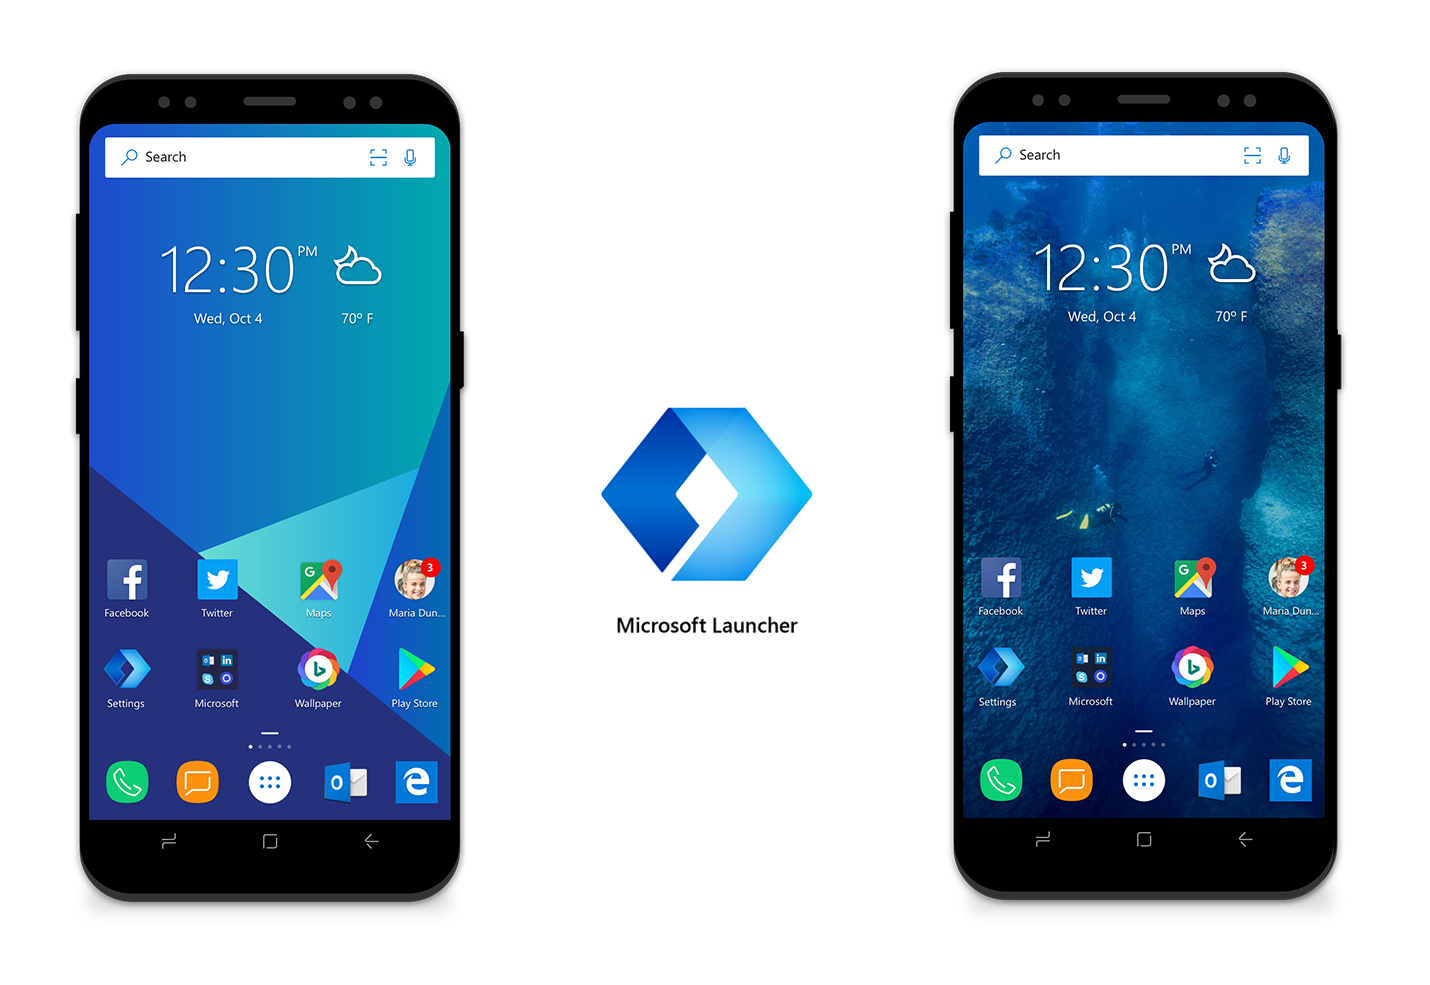 New Microsoft Launcher 5.0.2.47383 version for Android - November 20 f8d914f0746fe7594075d0b98171885f.png